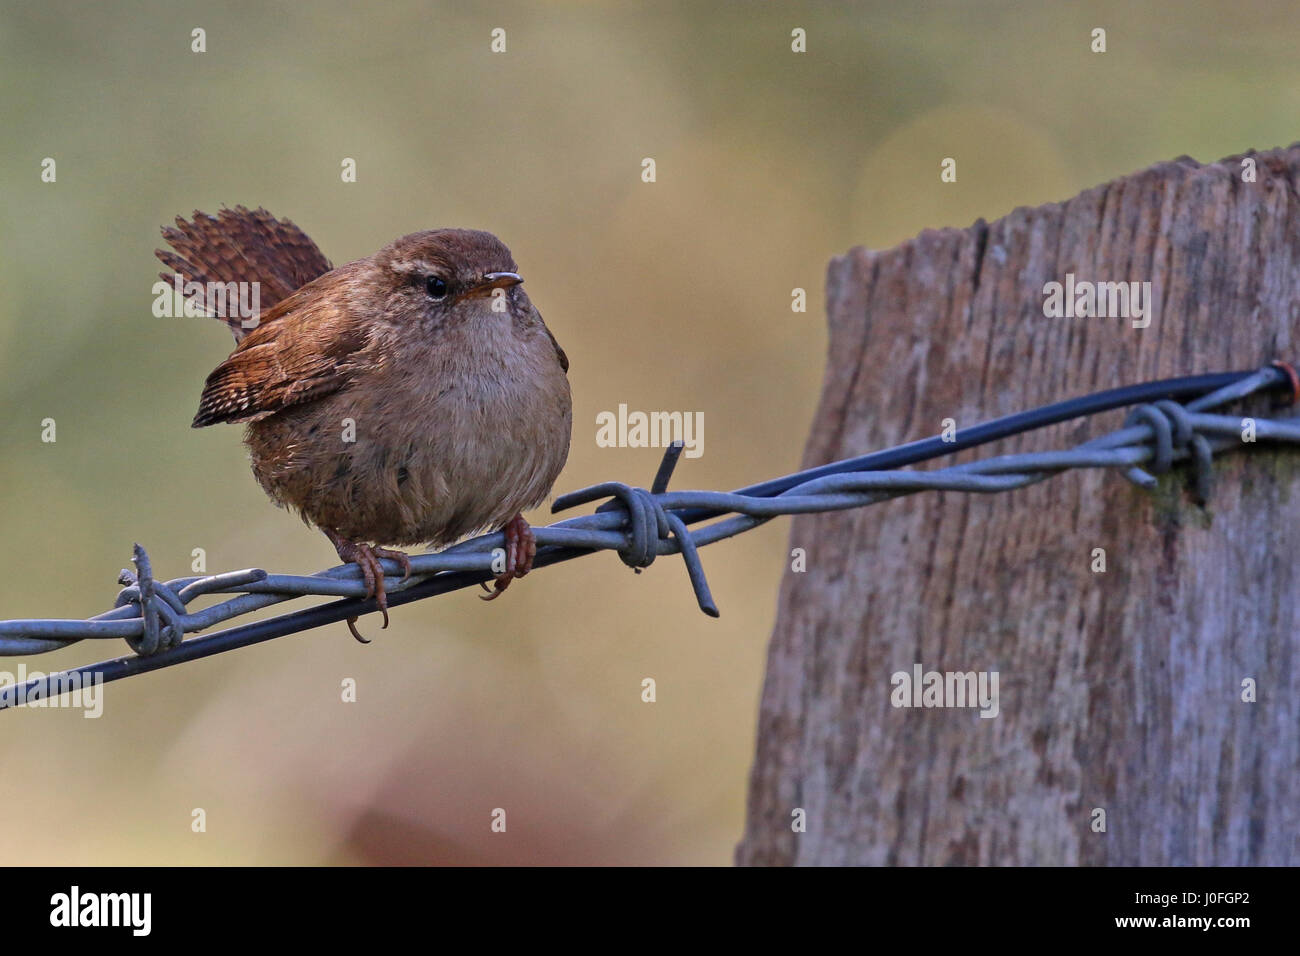 Wren sitting on barbed wire fence Stock Photo